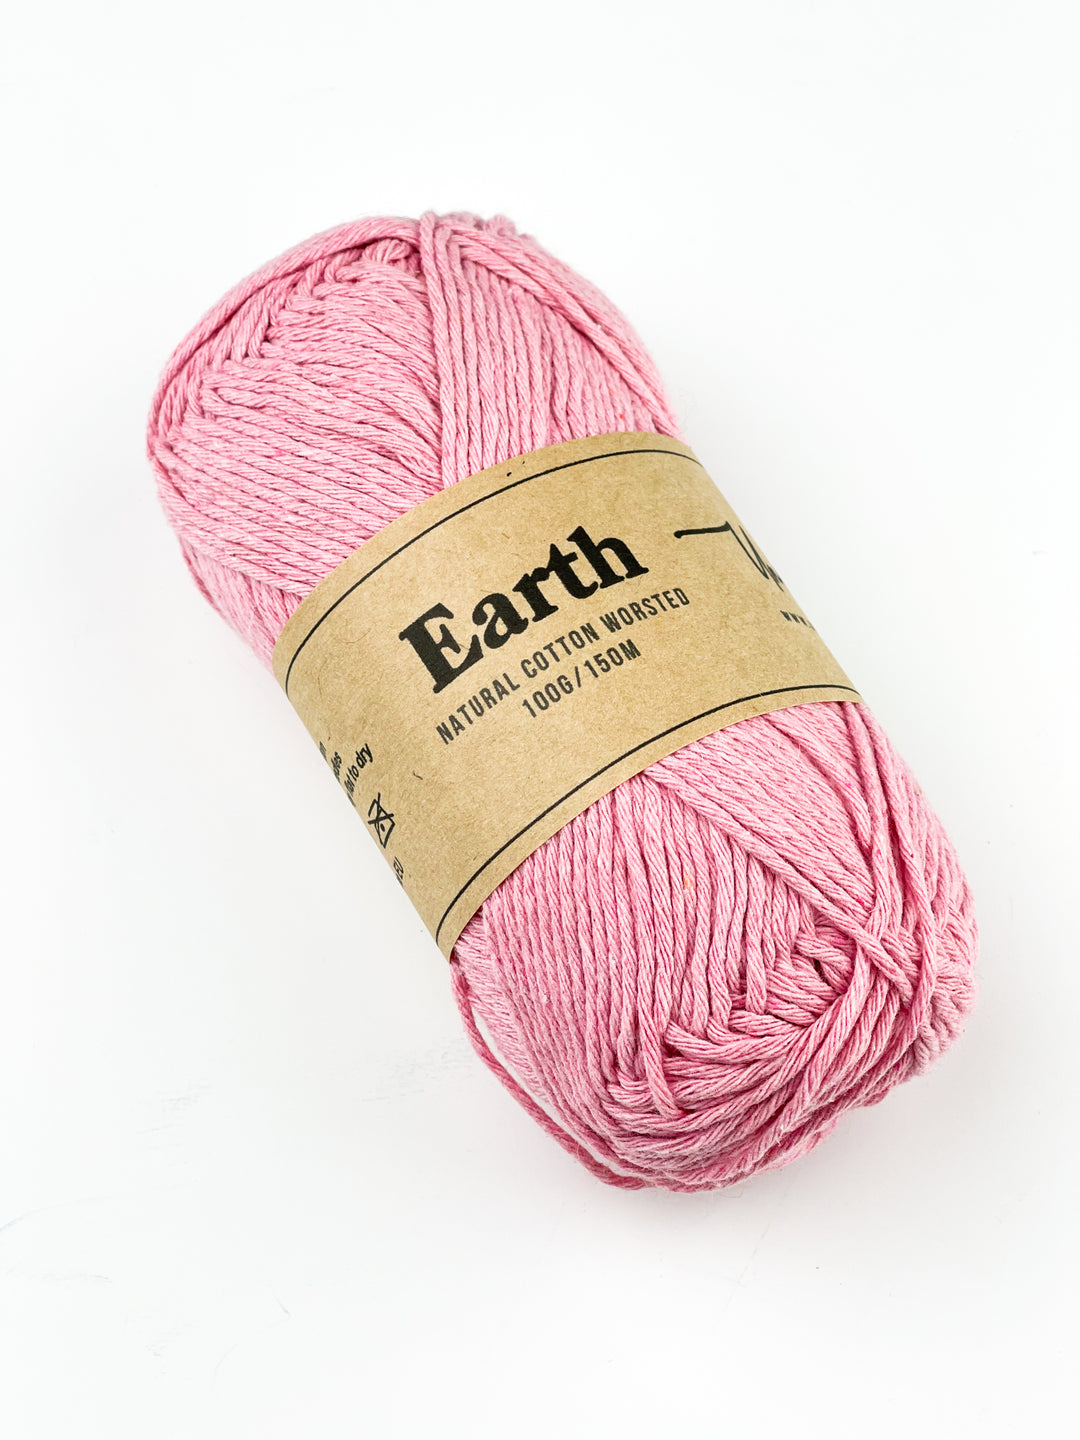 Unravelled Earth Cotton Worsted